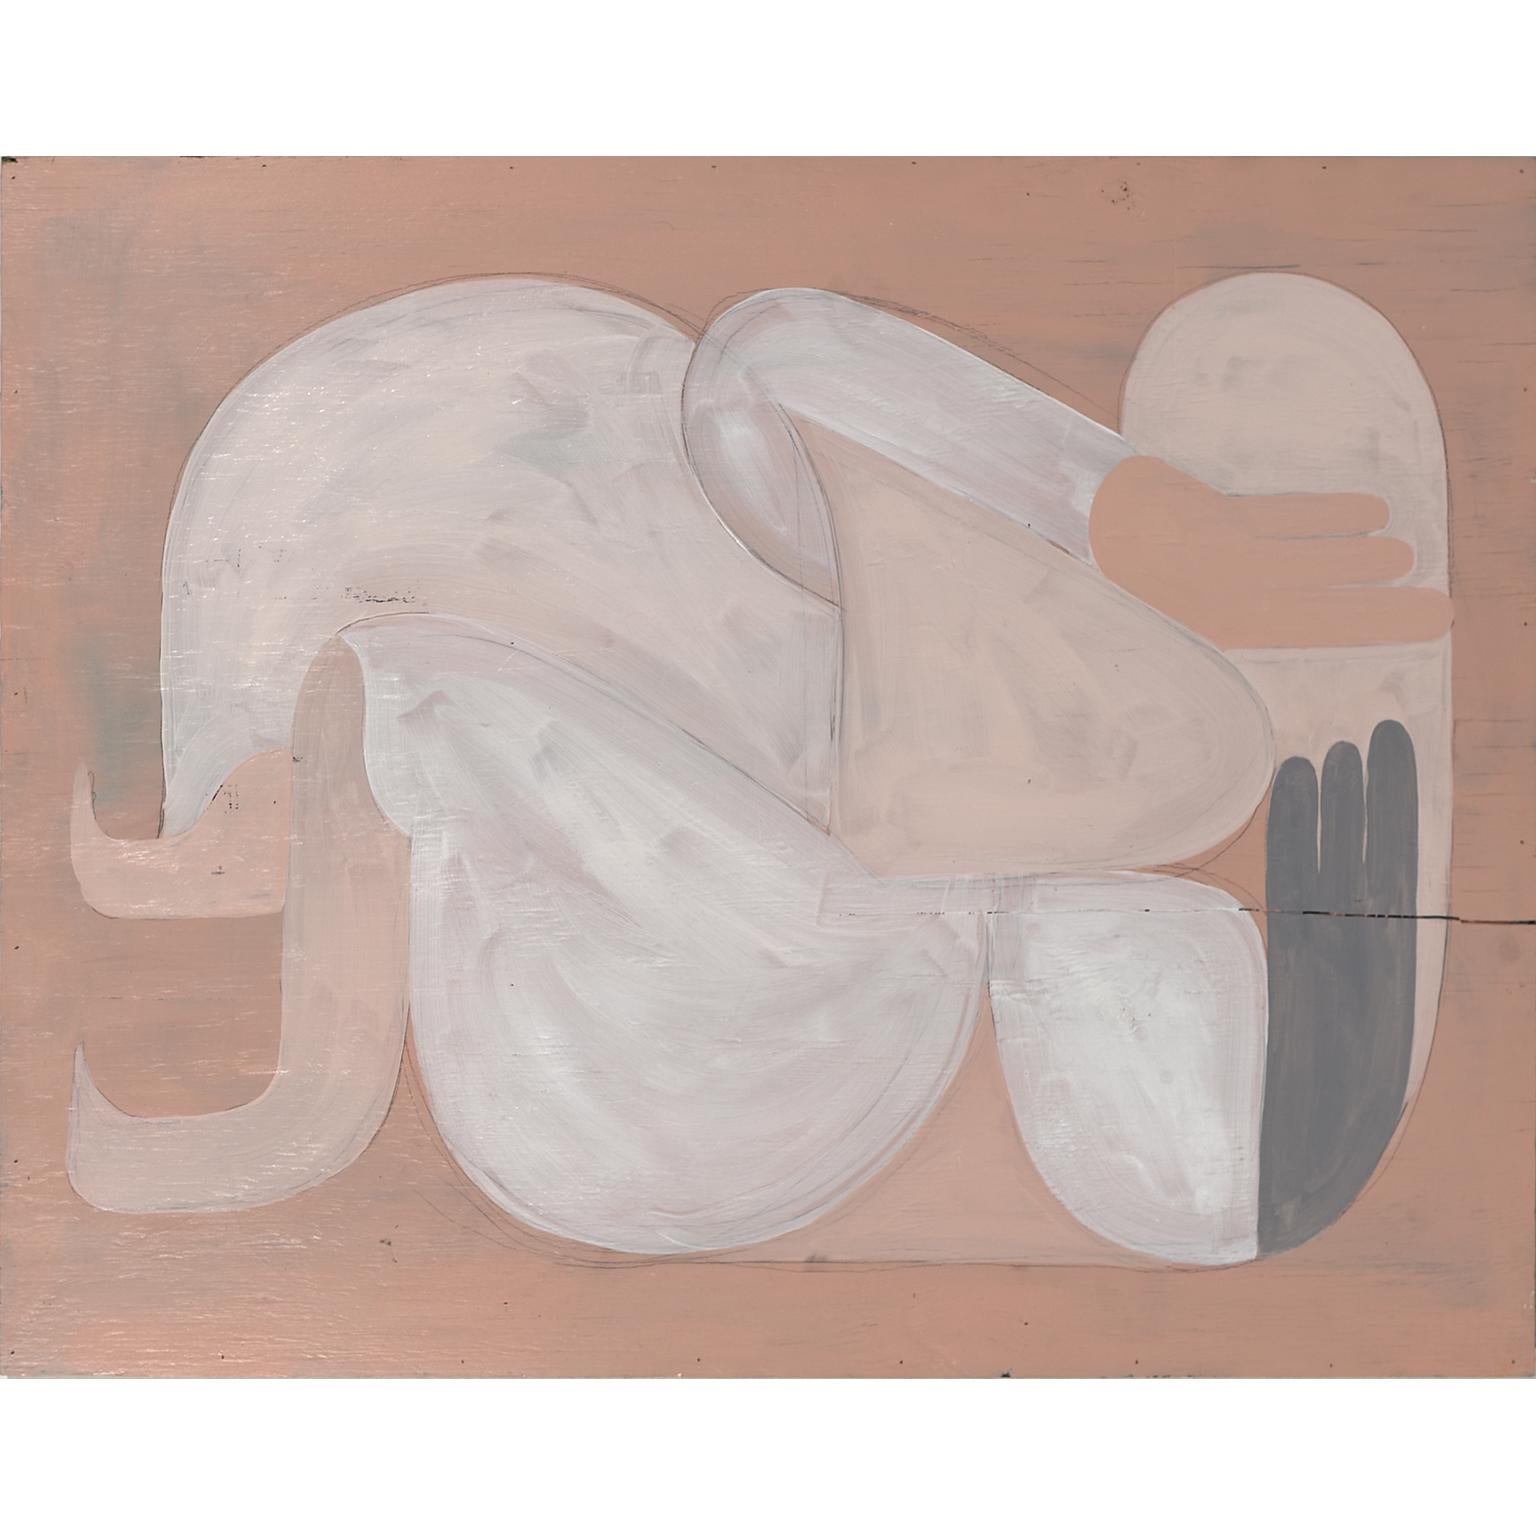 Kyle Andrew Steed Figurative Painting - The subtle expression of self-absorbtion, Abstract. Pink, coral, white and grey